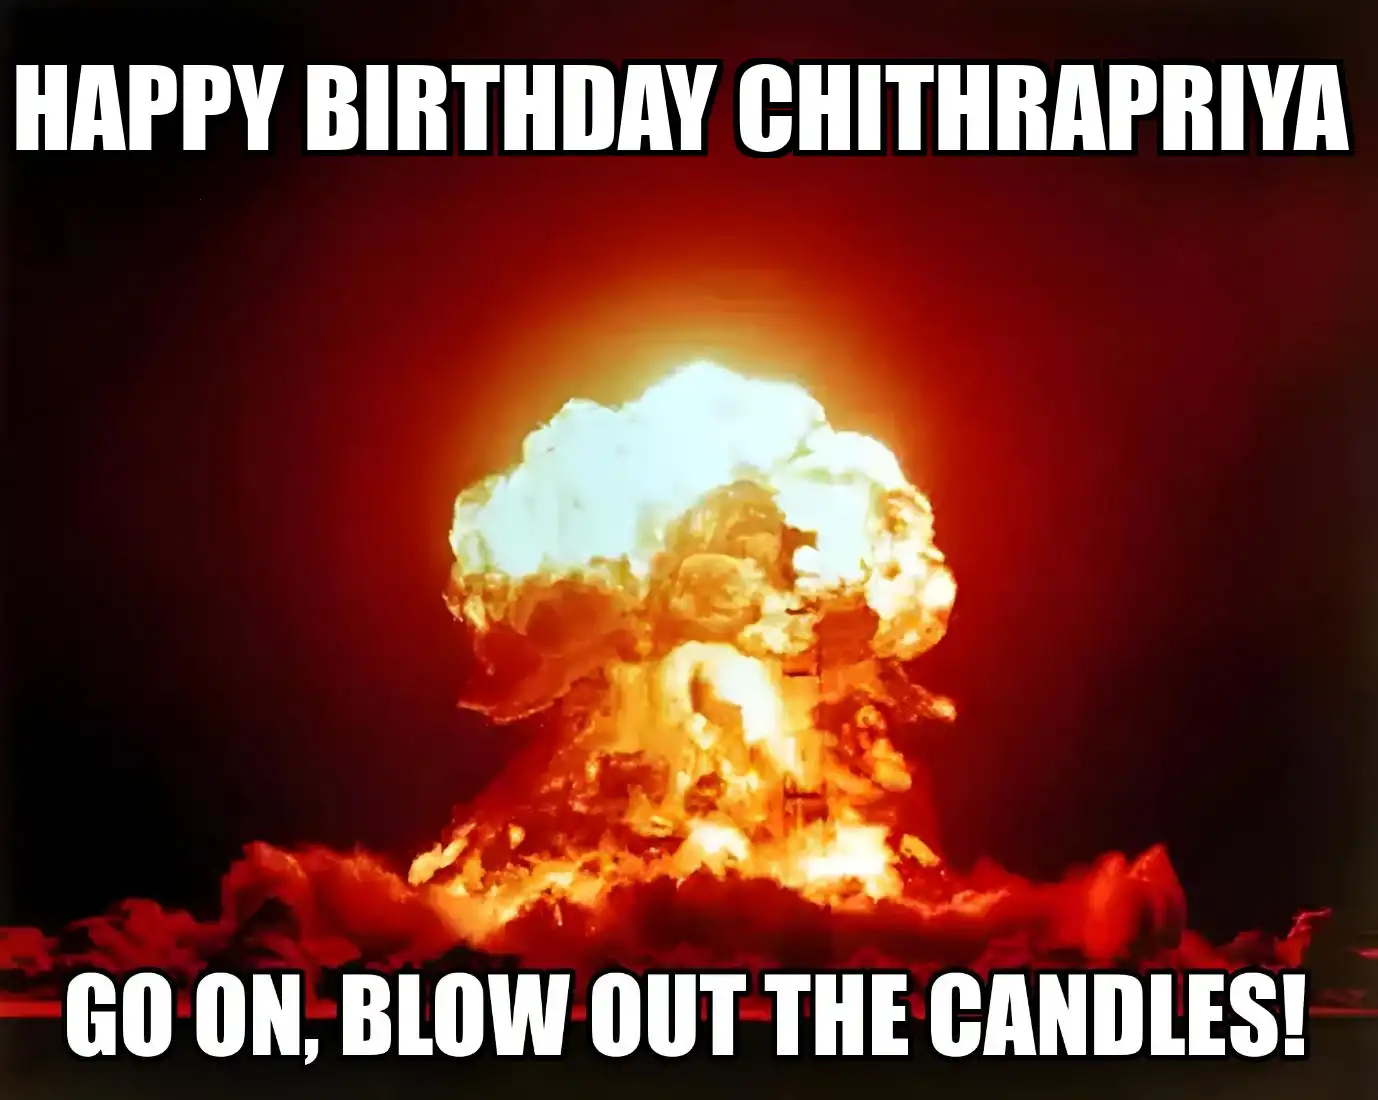 Happy Birthday Chithrapriya Go On Blow Out The Candles Meme